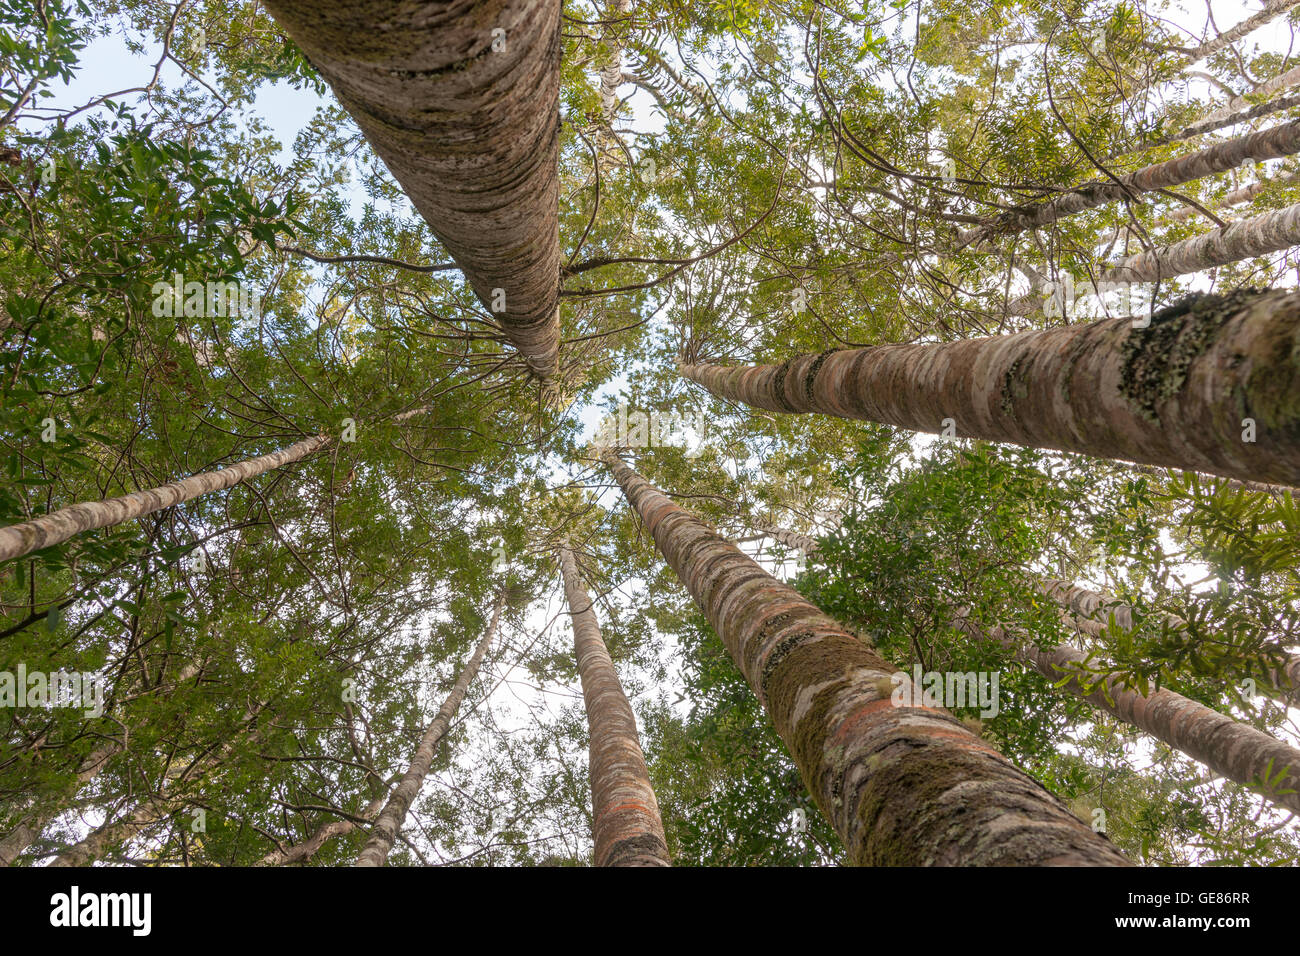 Kauri forest low point of view looking into forest canopy. Stock Photo